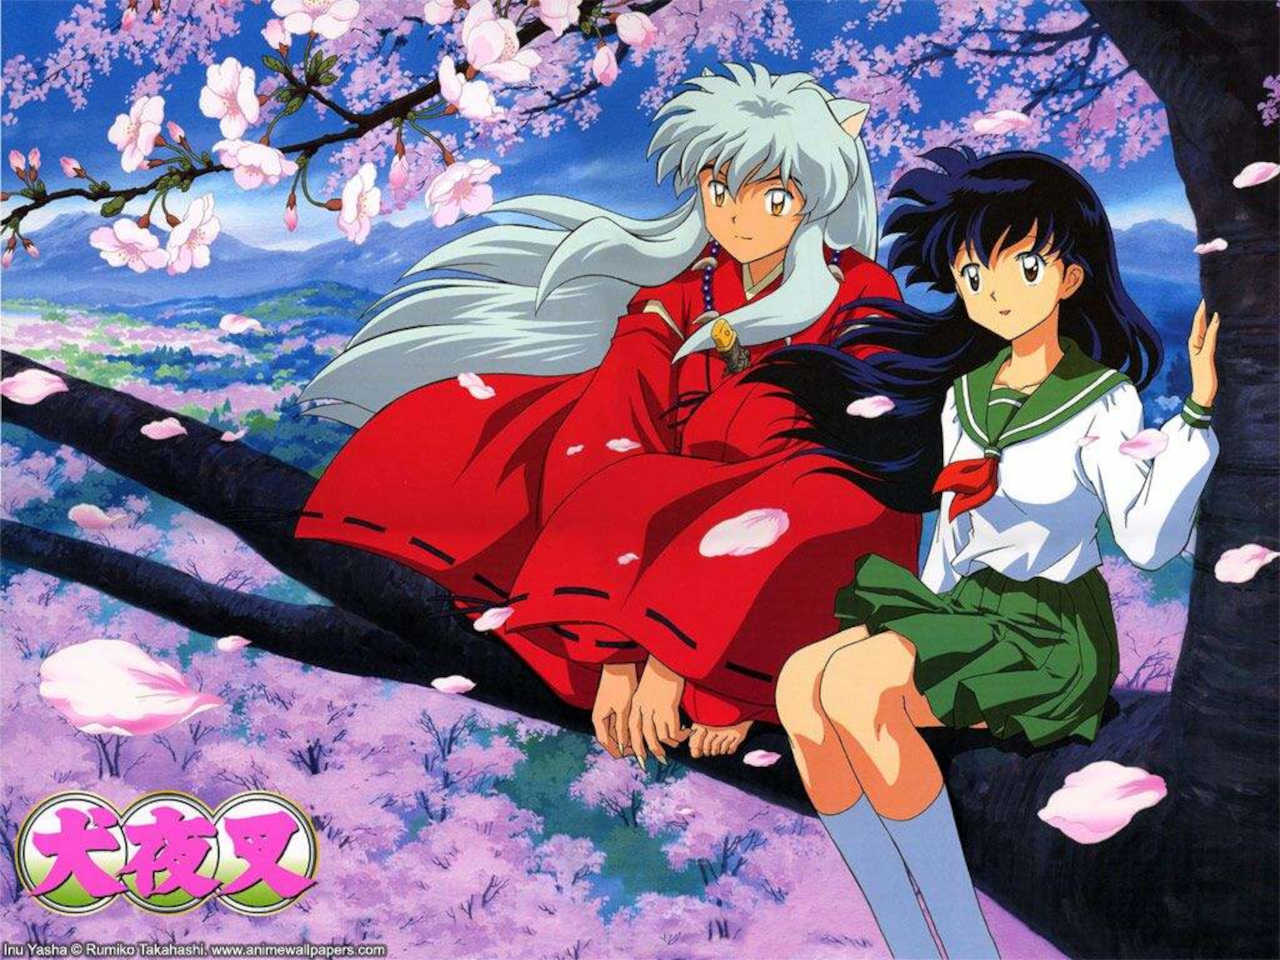 Inuyasha: Kagome becomes real with this beautiful cosplay